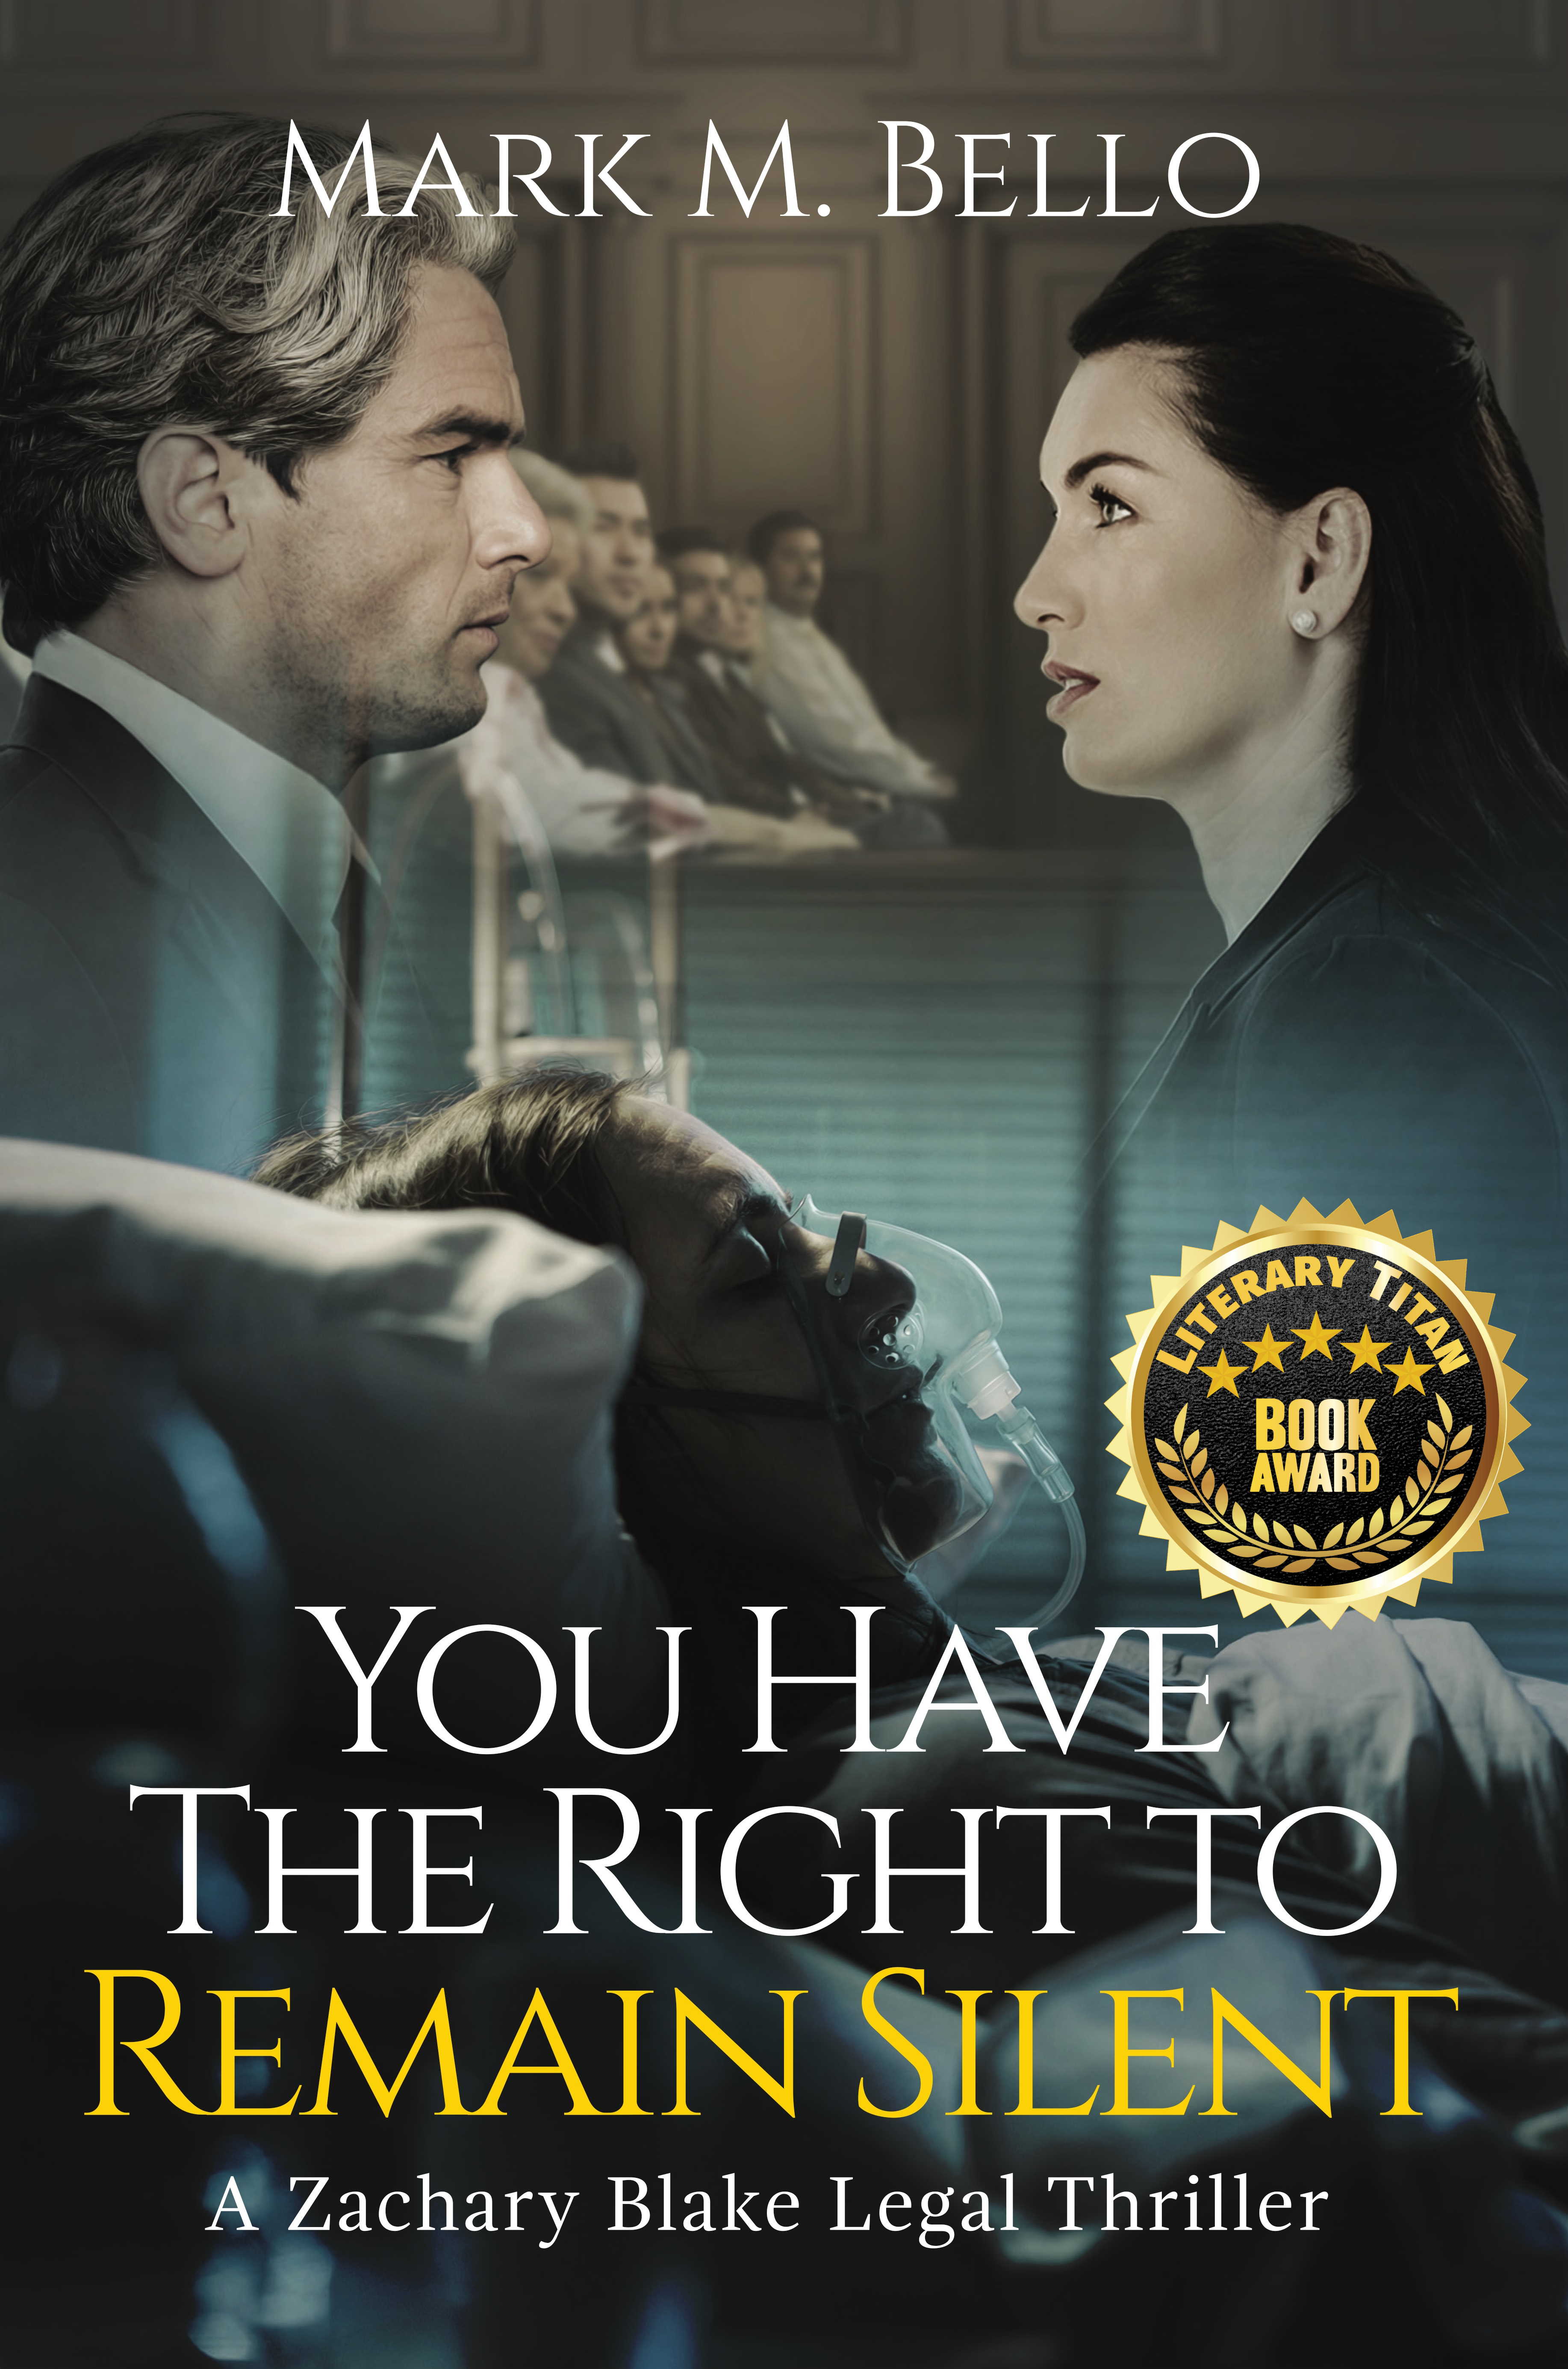 Author Mark M. Bello Has Received the Literary Titan Gold Award for His Legal Thriller Novel You Have The Right to Remain Silent